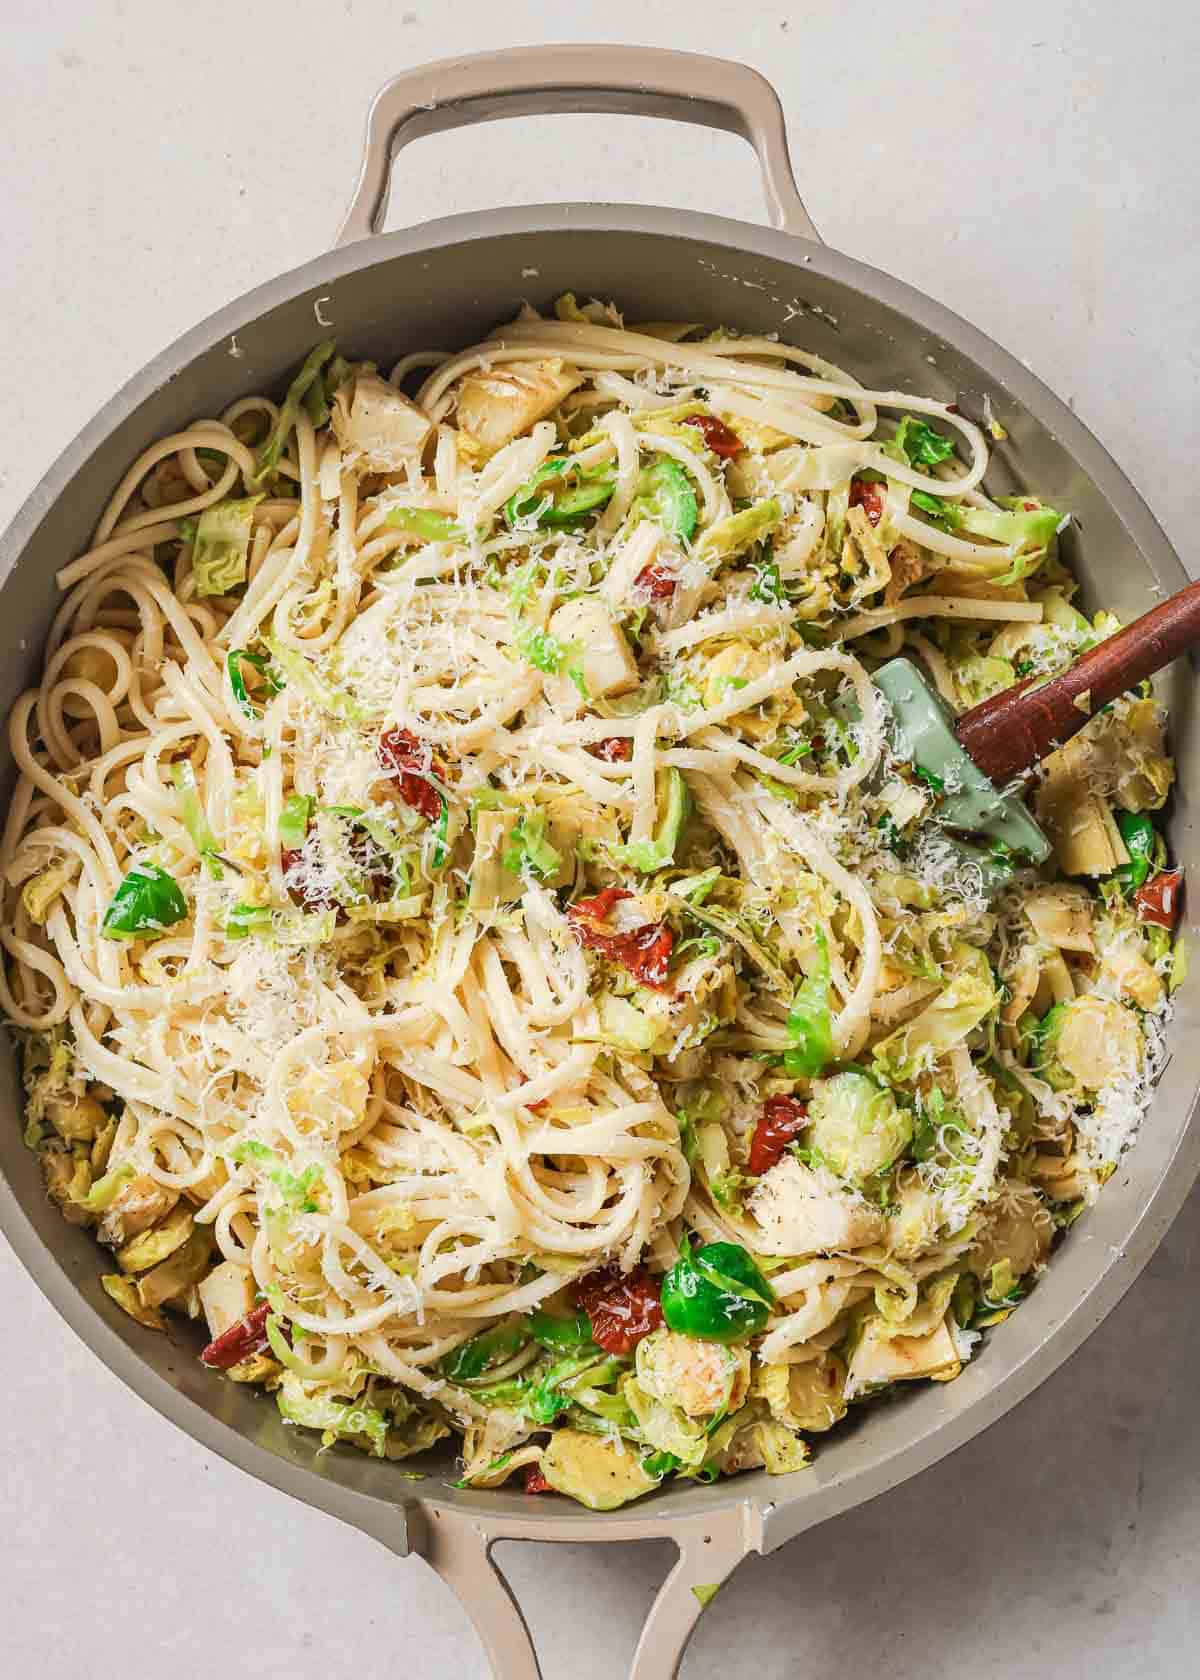 A pan full of pasta with brussels sprouts and grated parmesan cheese.